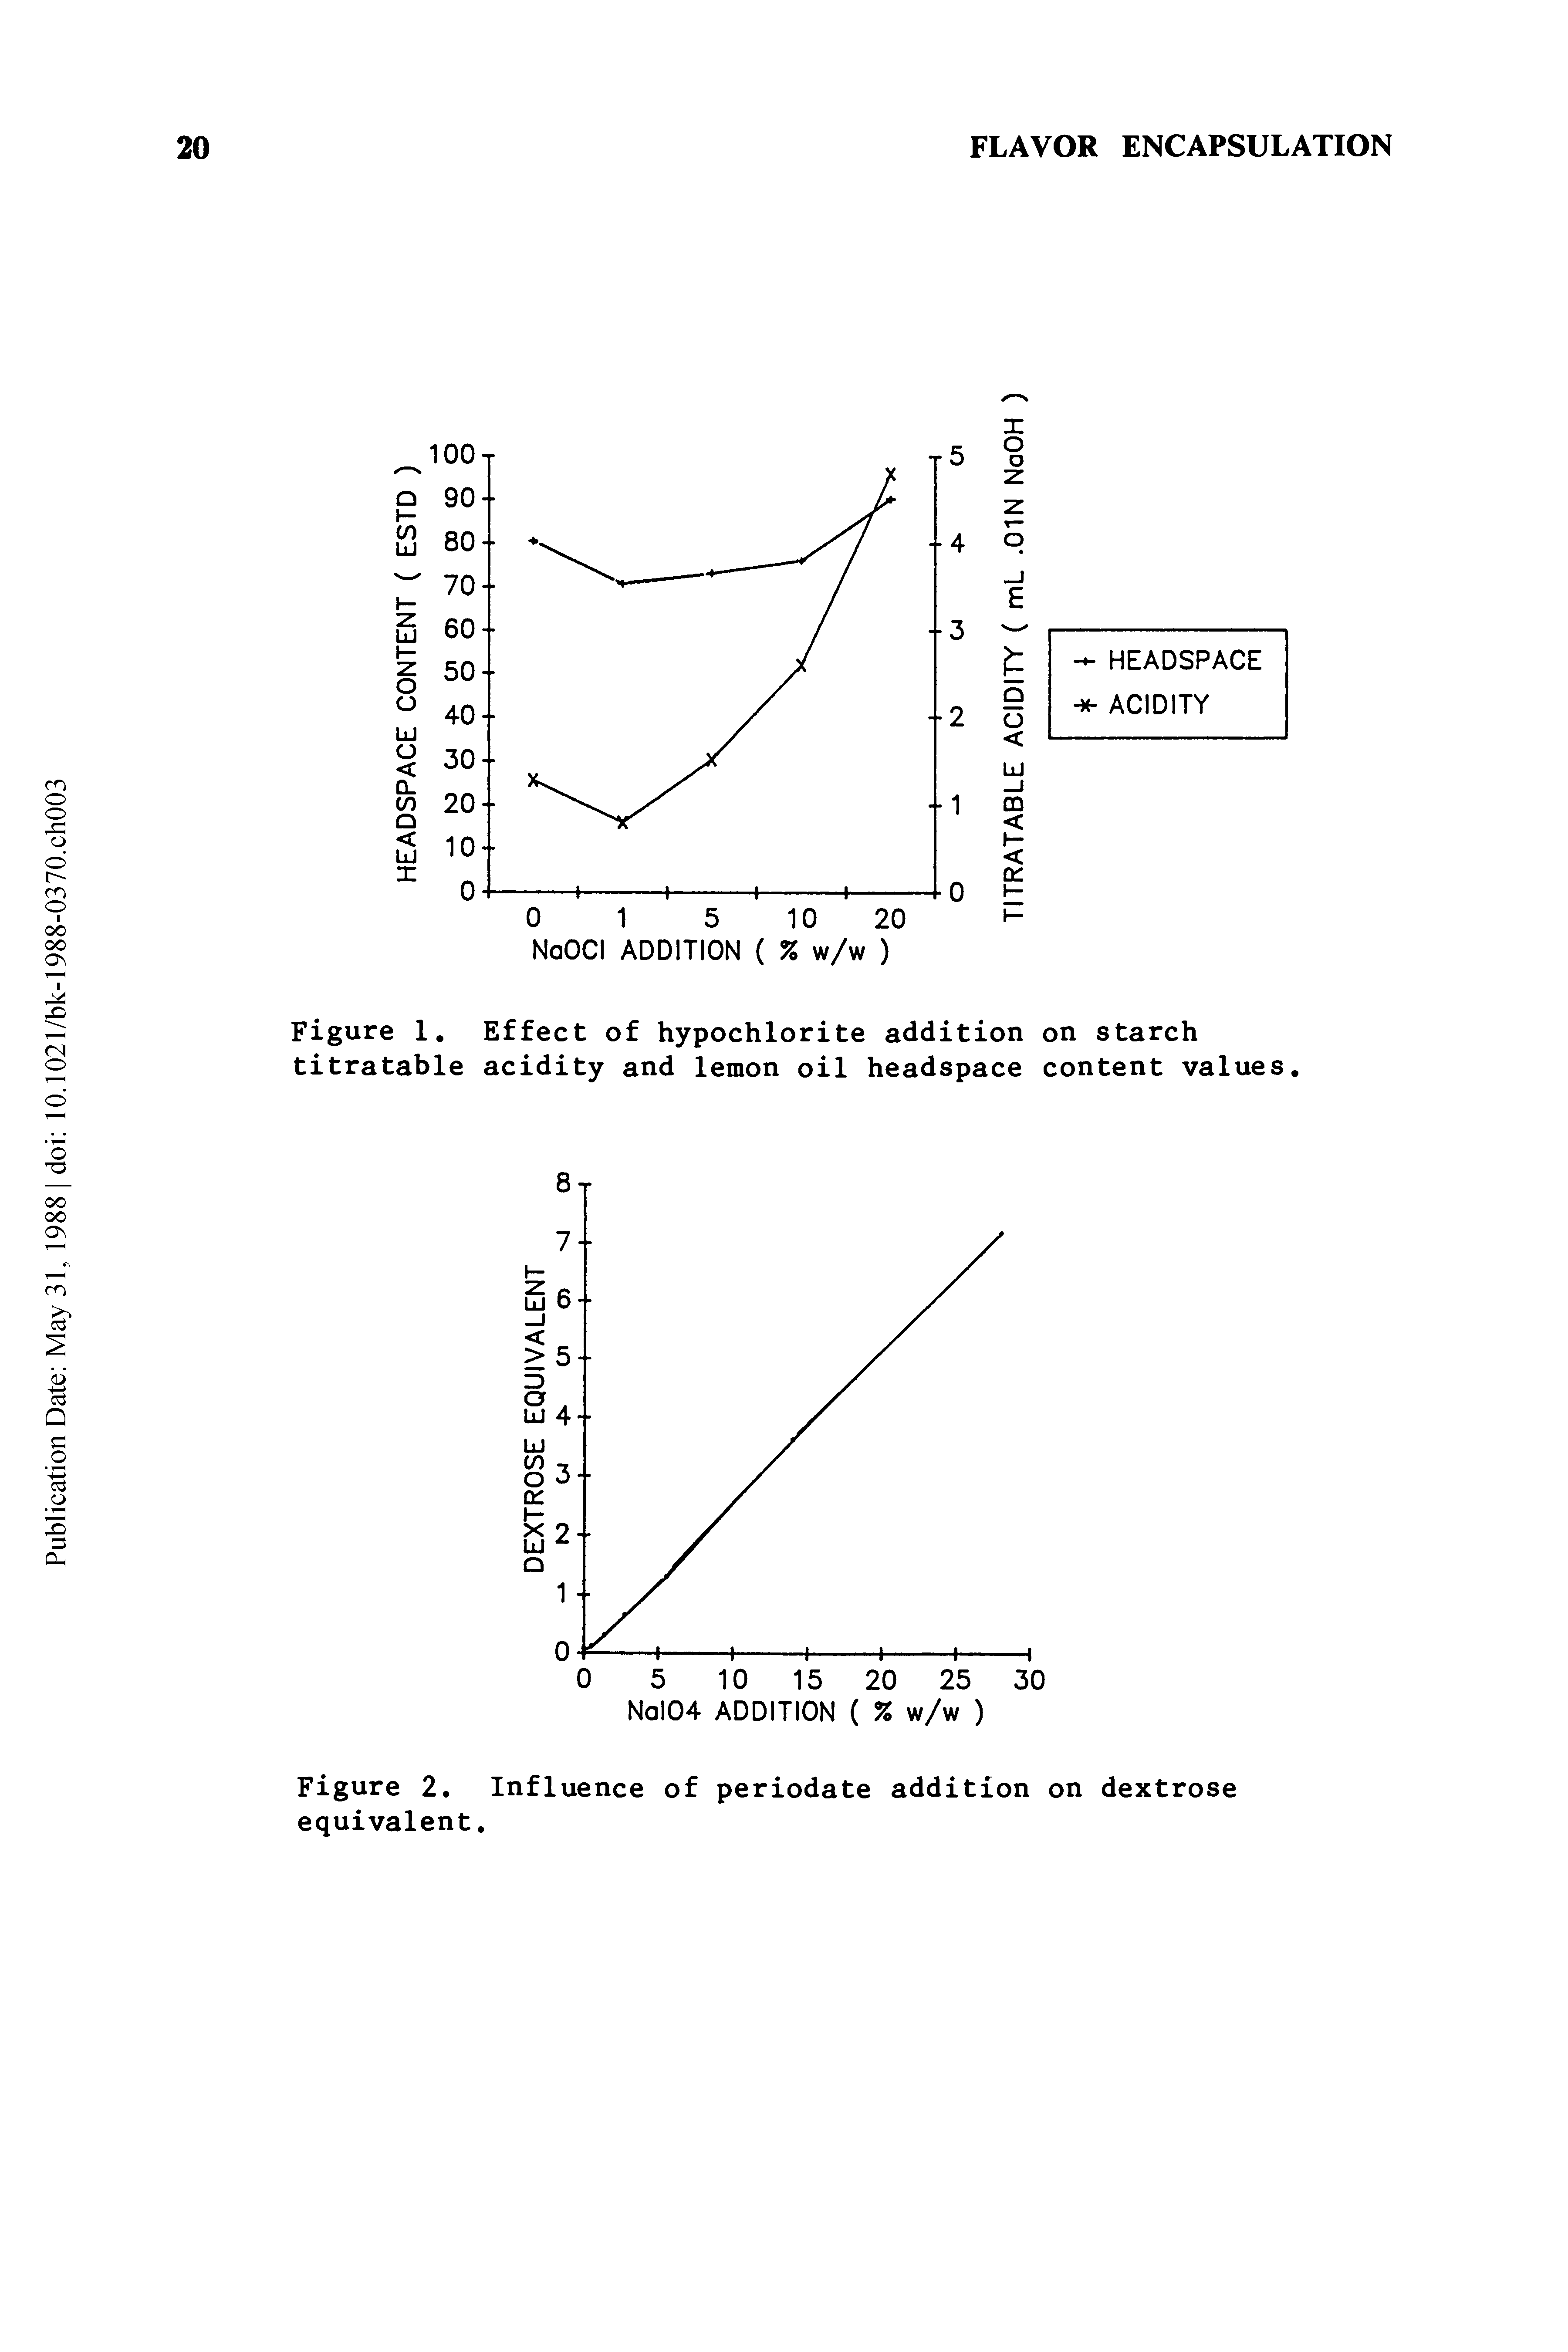 Figure 1. Effect of hypochlorite addition on starch titratable acidity and lemon oil headspace content values.